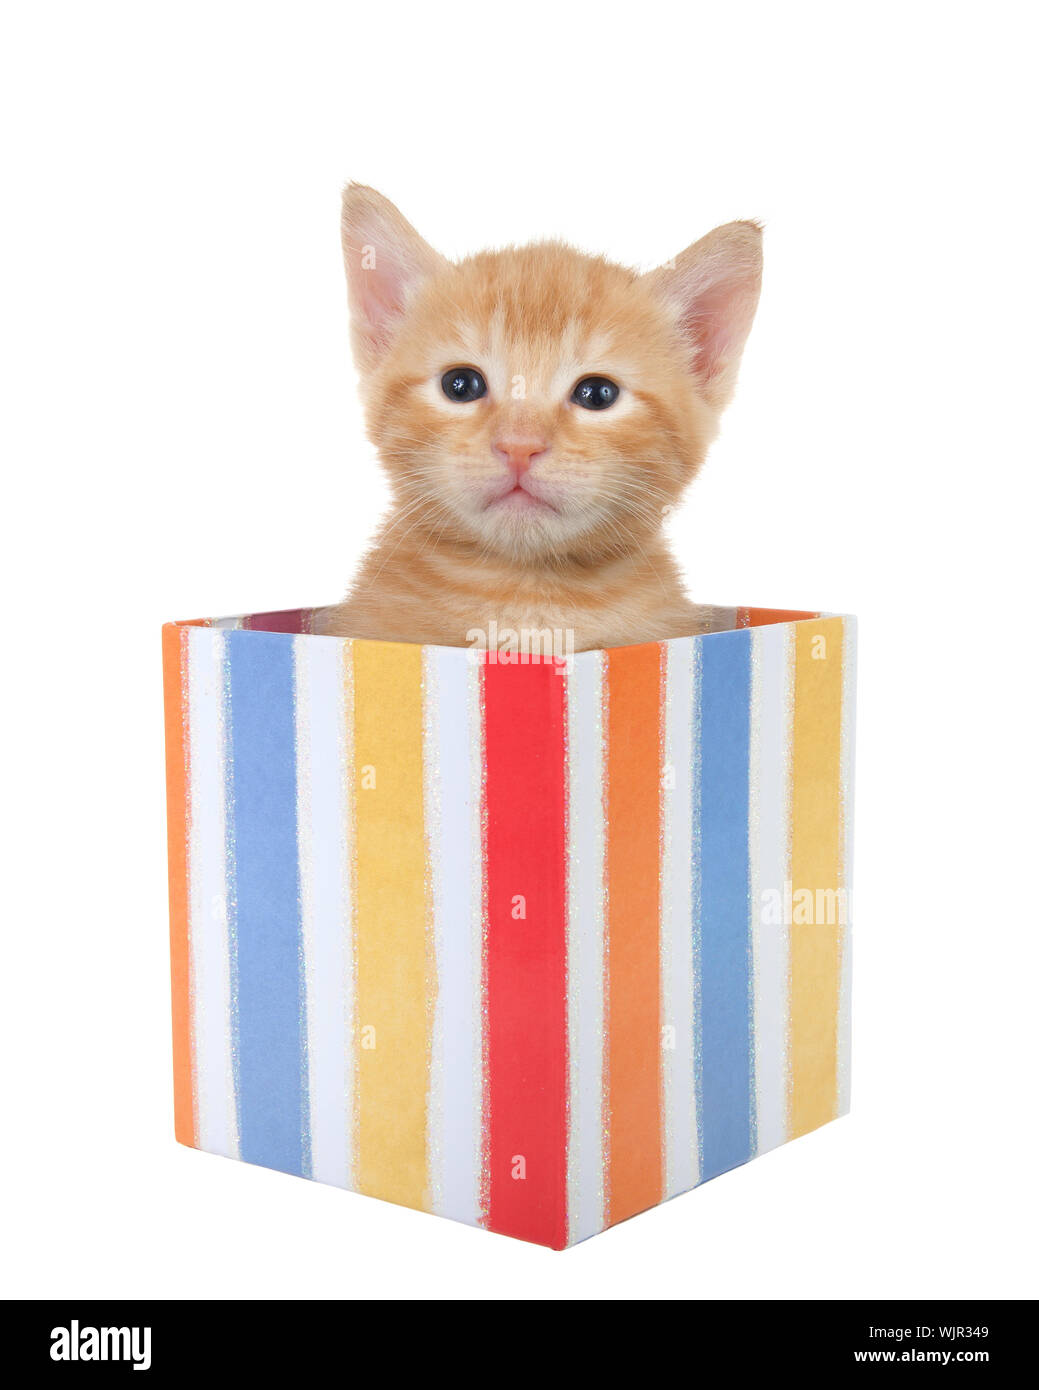 Adorable tiny orange ginger tabby kitten peaking out of a colorful striped present box isolated on white background. Fun comical animal antics. Stock Photo